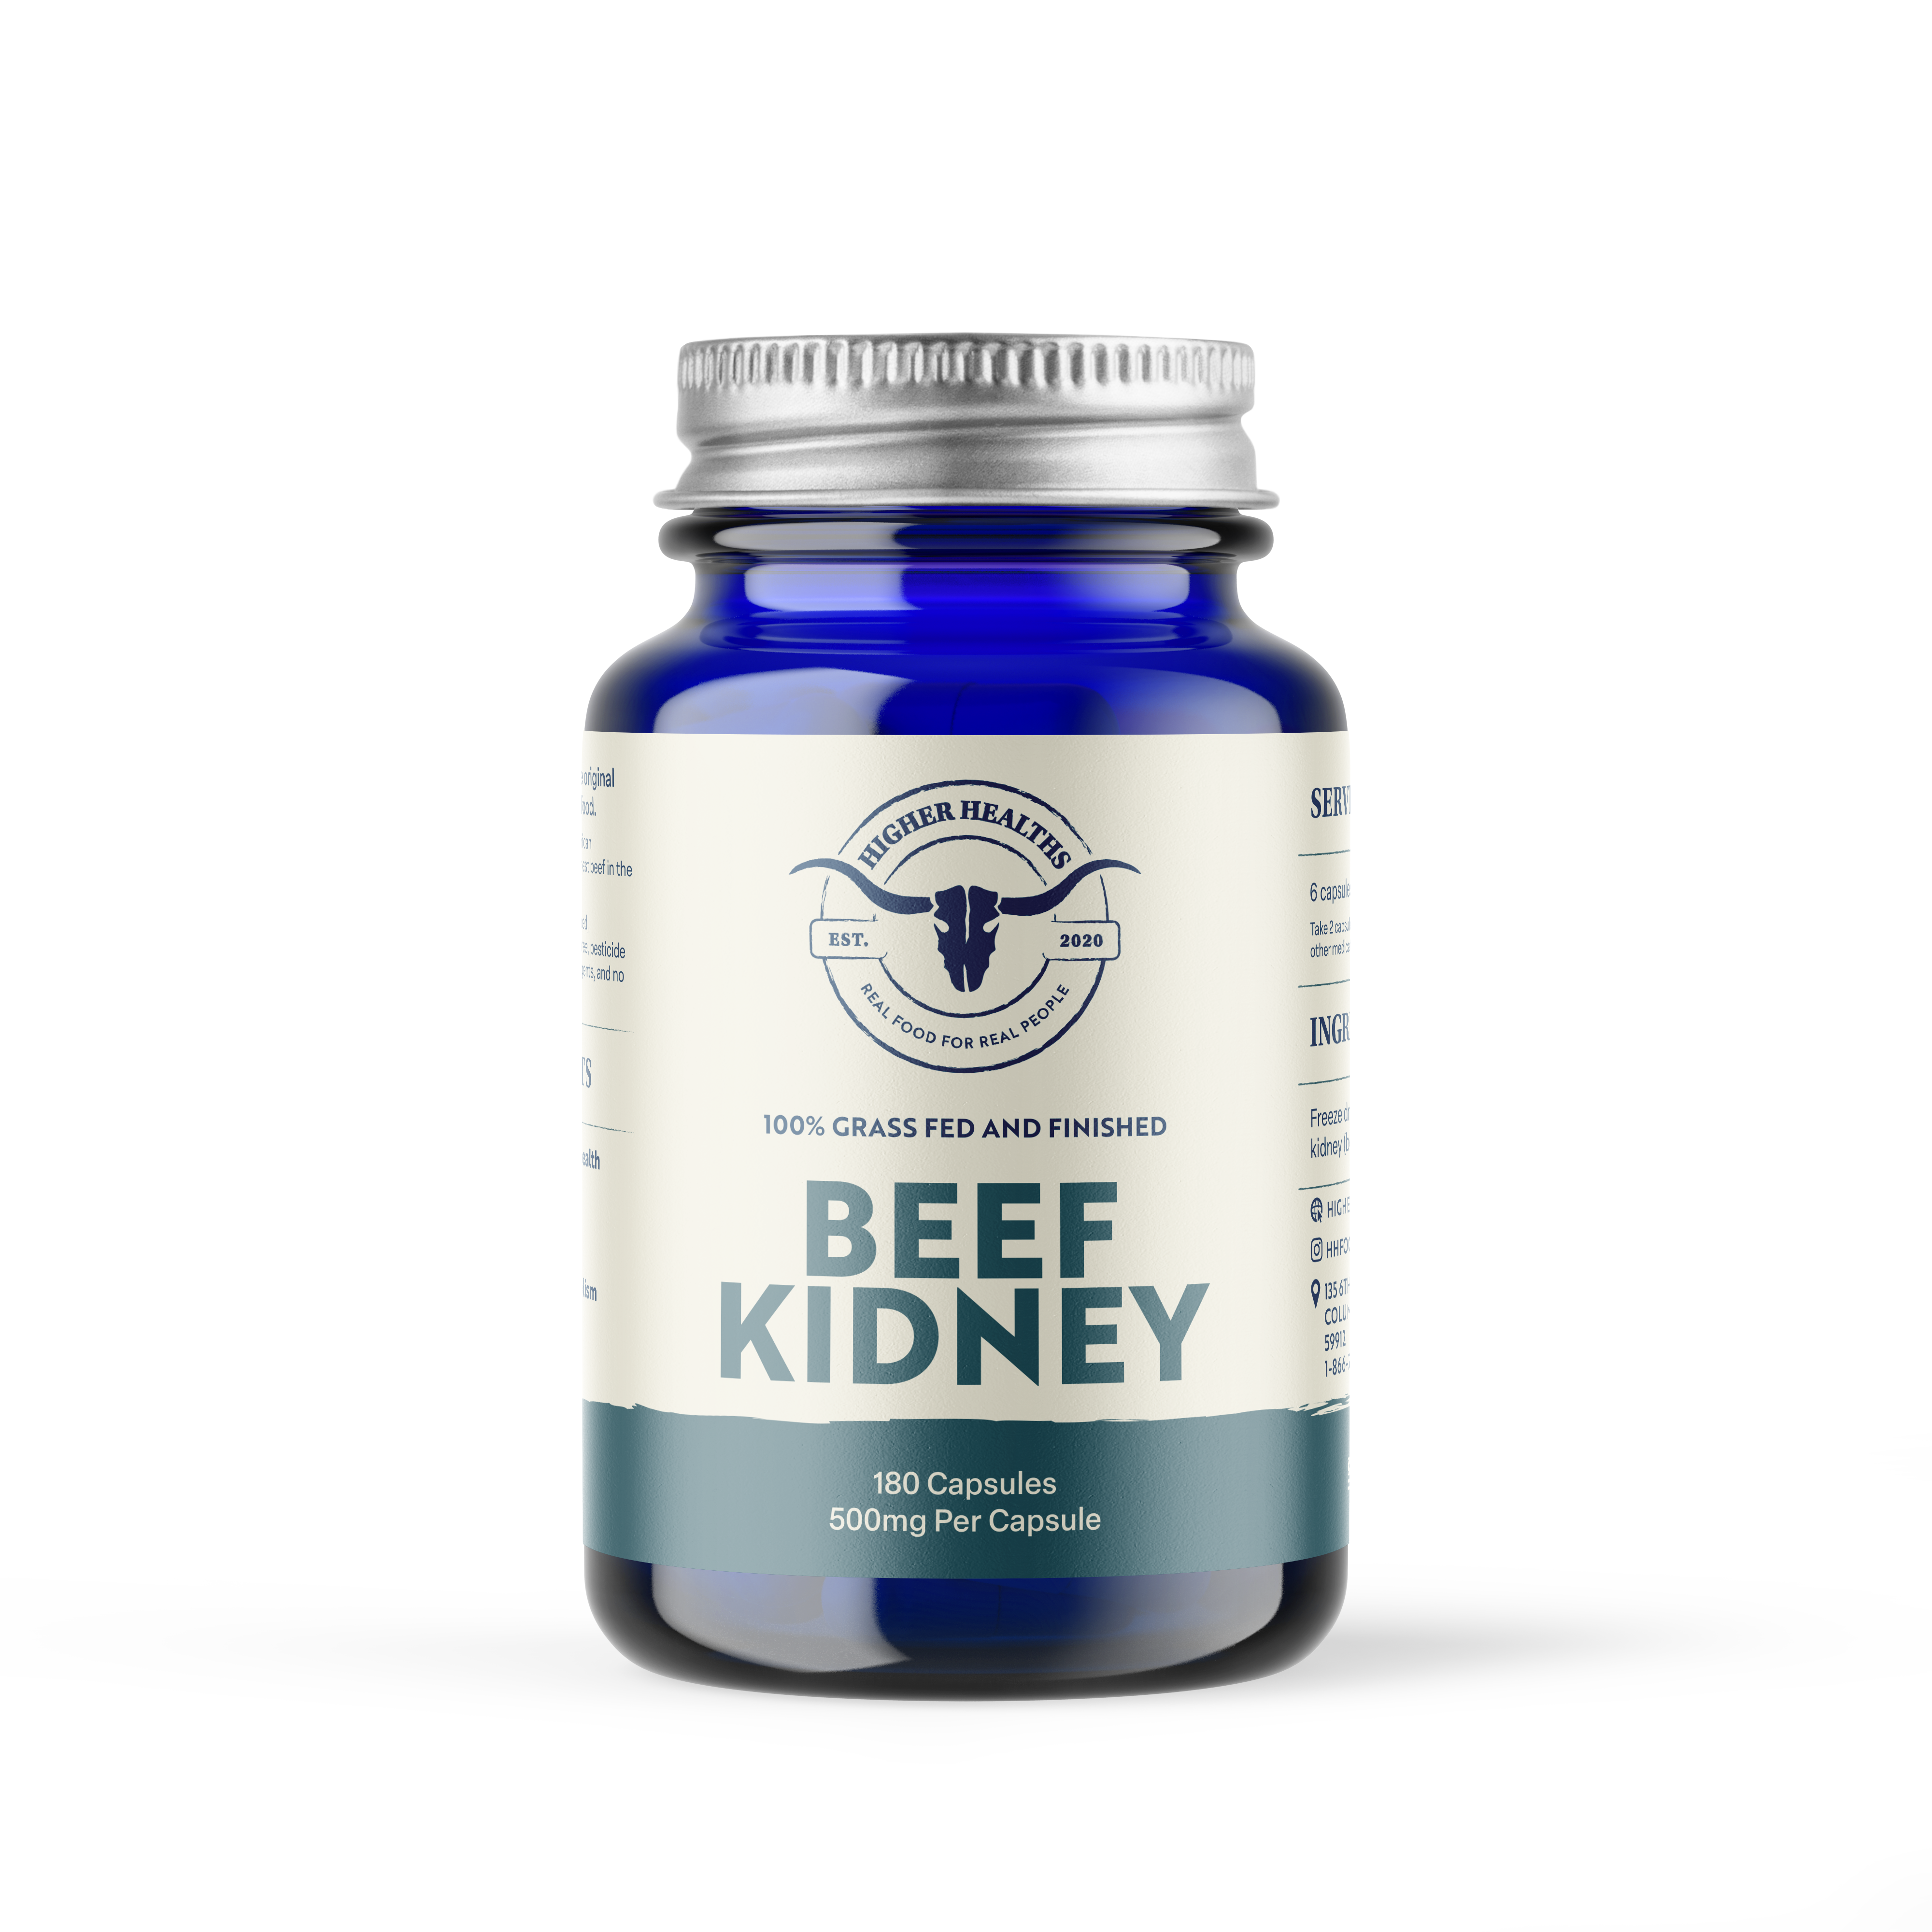 SUBSCRIBE & SAVE! Beef Kidney - Immune Maker